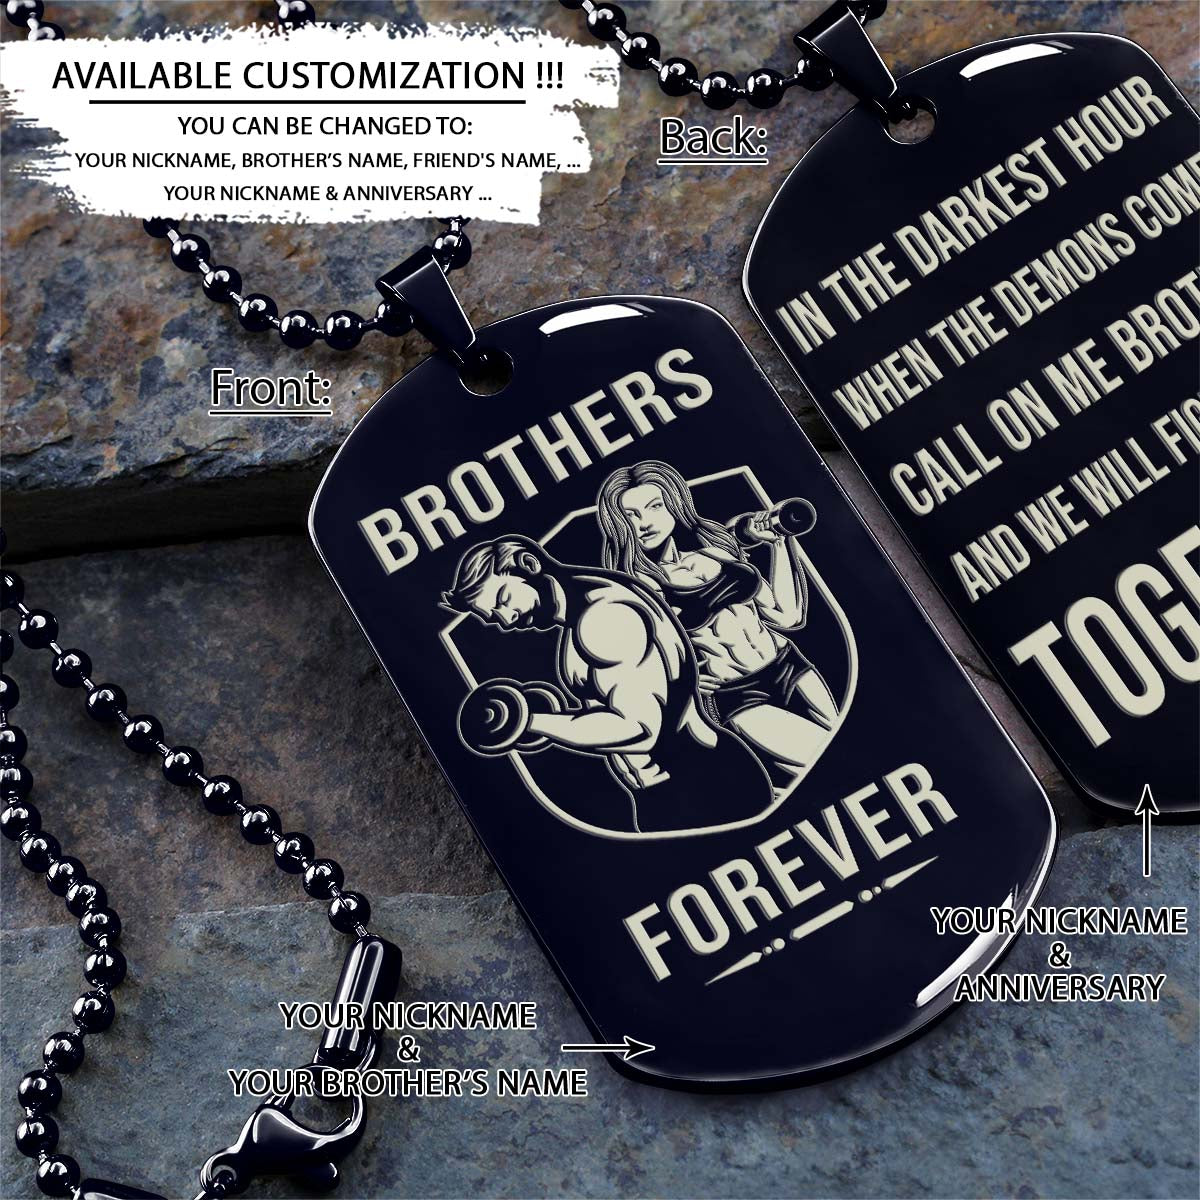 GYMD011 - Brothers Forever - It's About Being Better Than You Were The Day Before - Gym - Fitness Center - Workout - Gym Dog Tag - Gym Necklace - Black Engrave Dog Tag